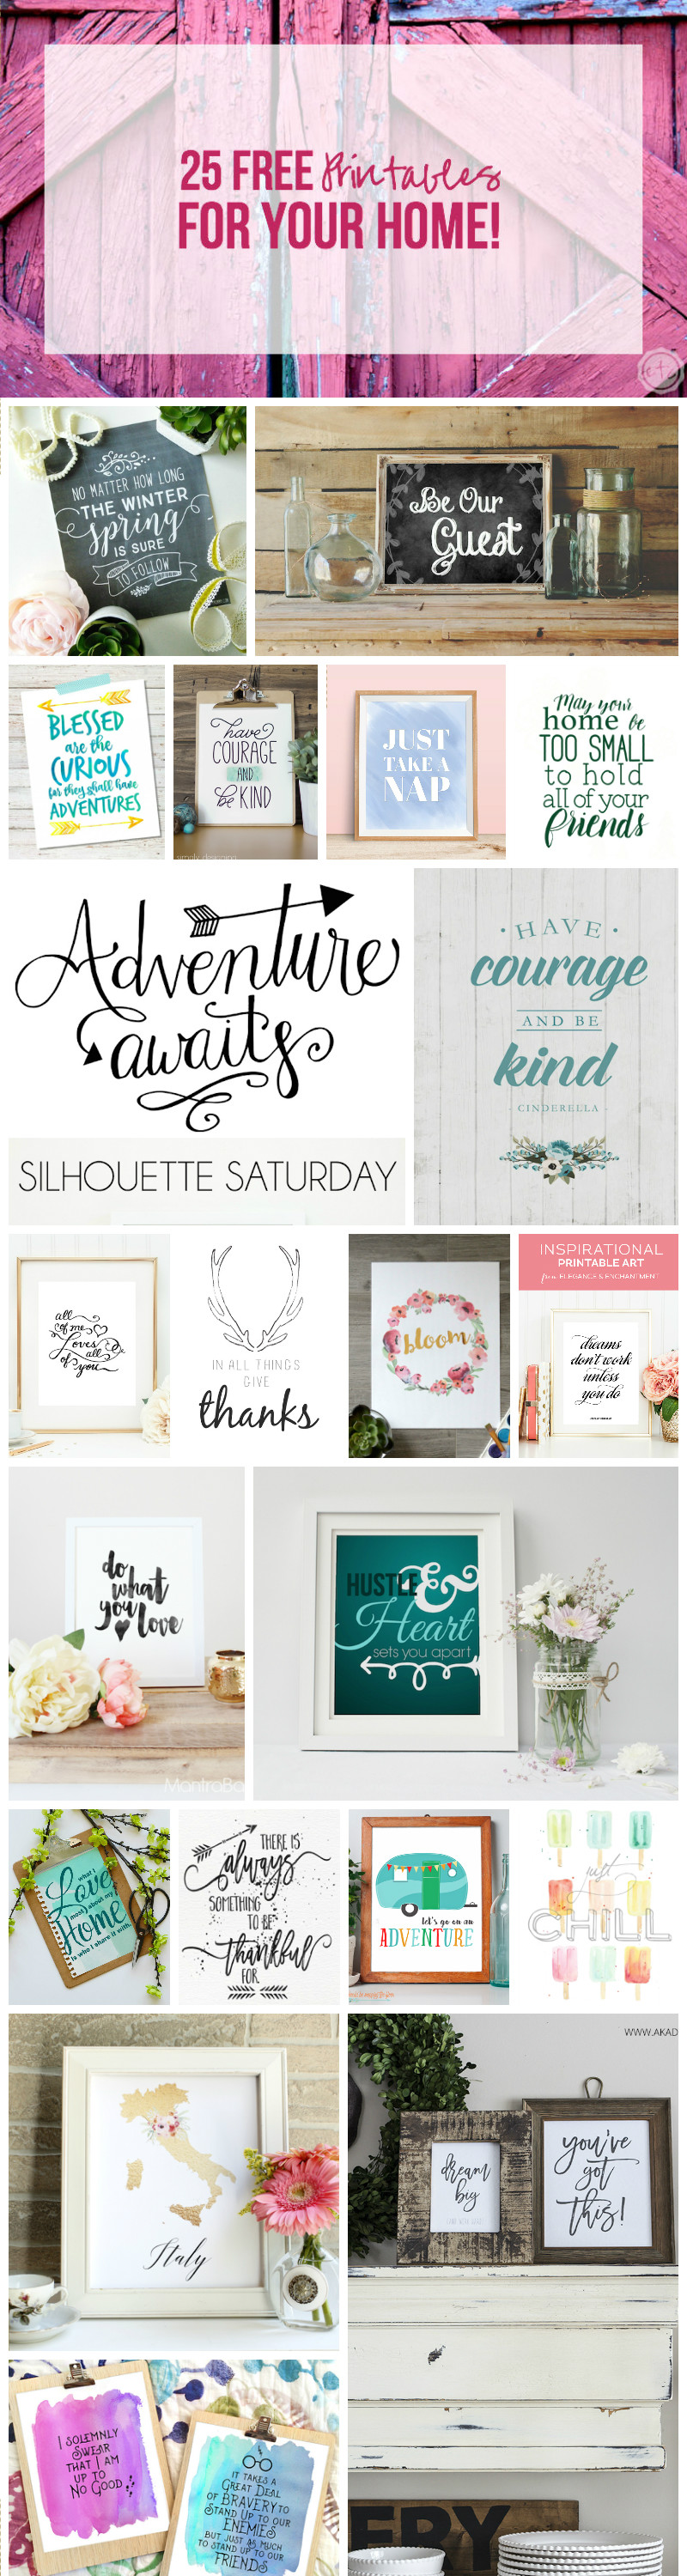 25 FREE Printables For Your Home!